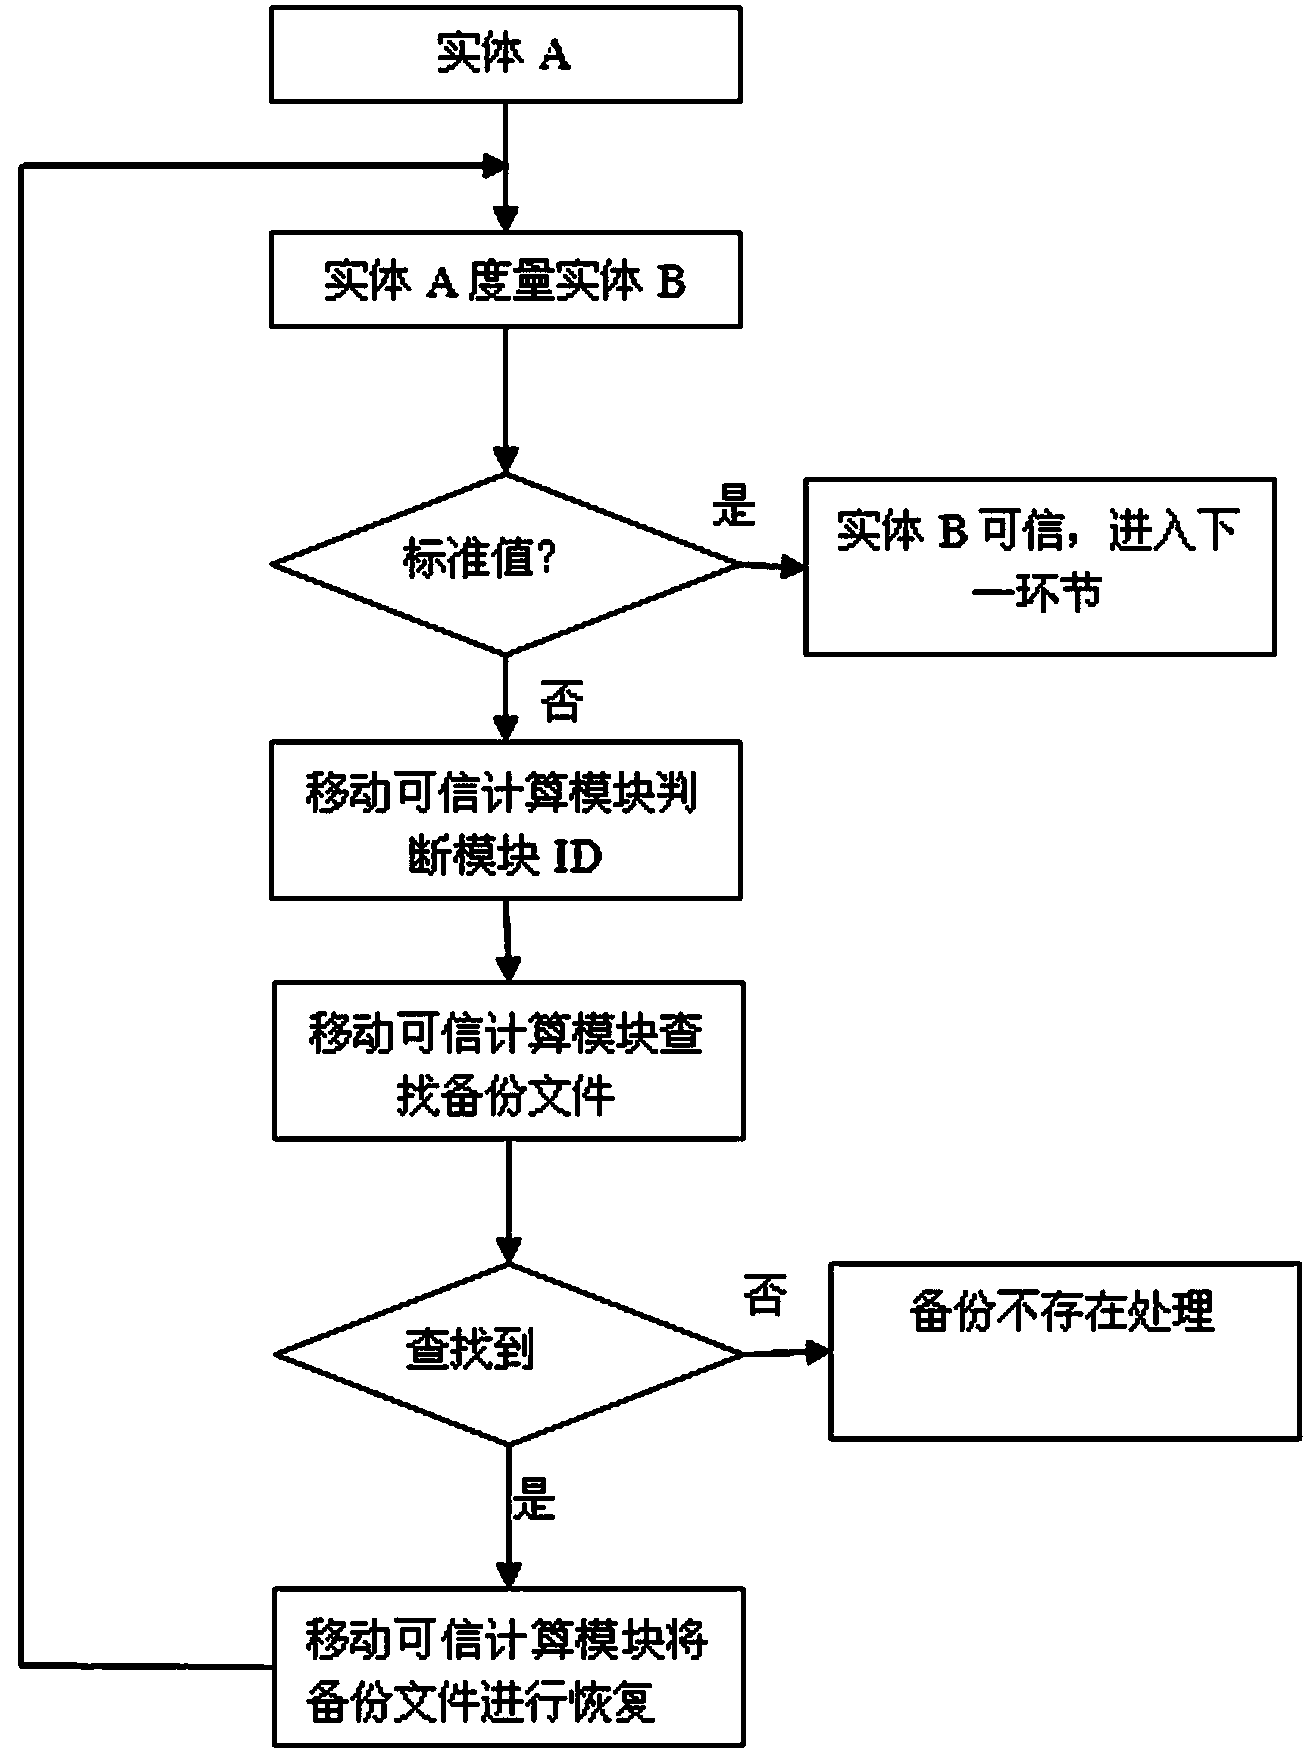 Embedded terminal dependable starting method based on mobile dependable computing module